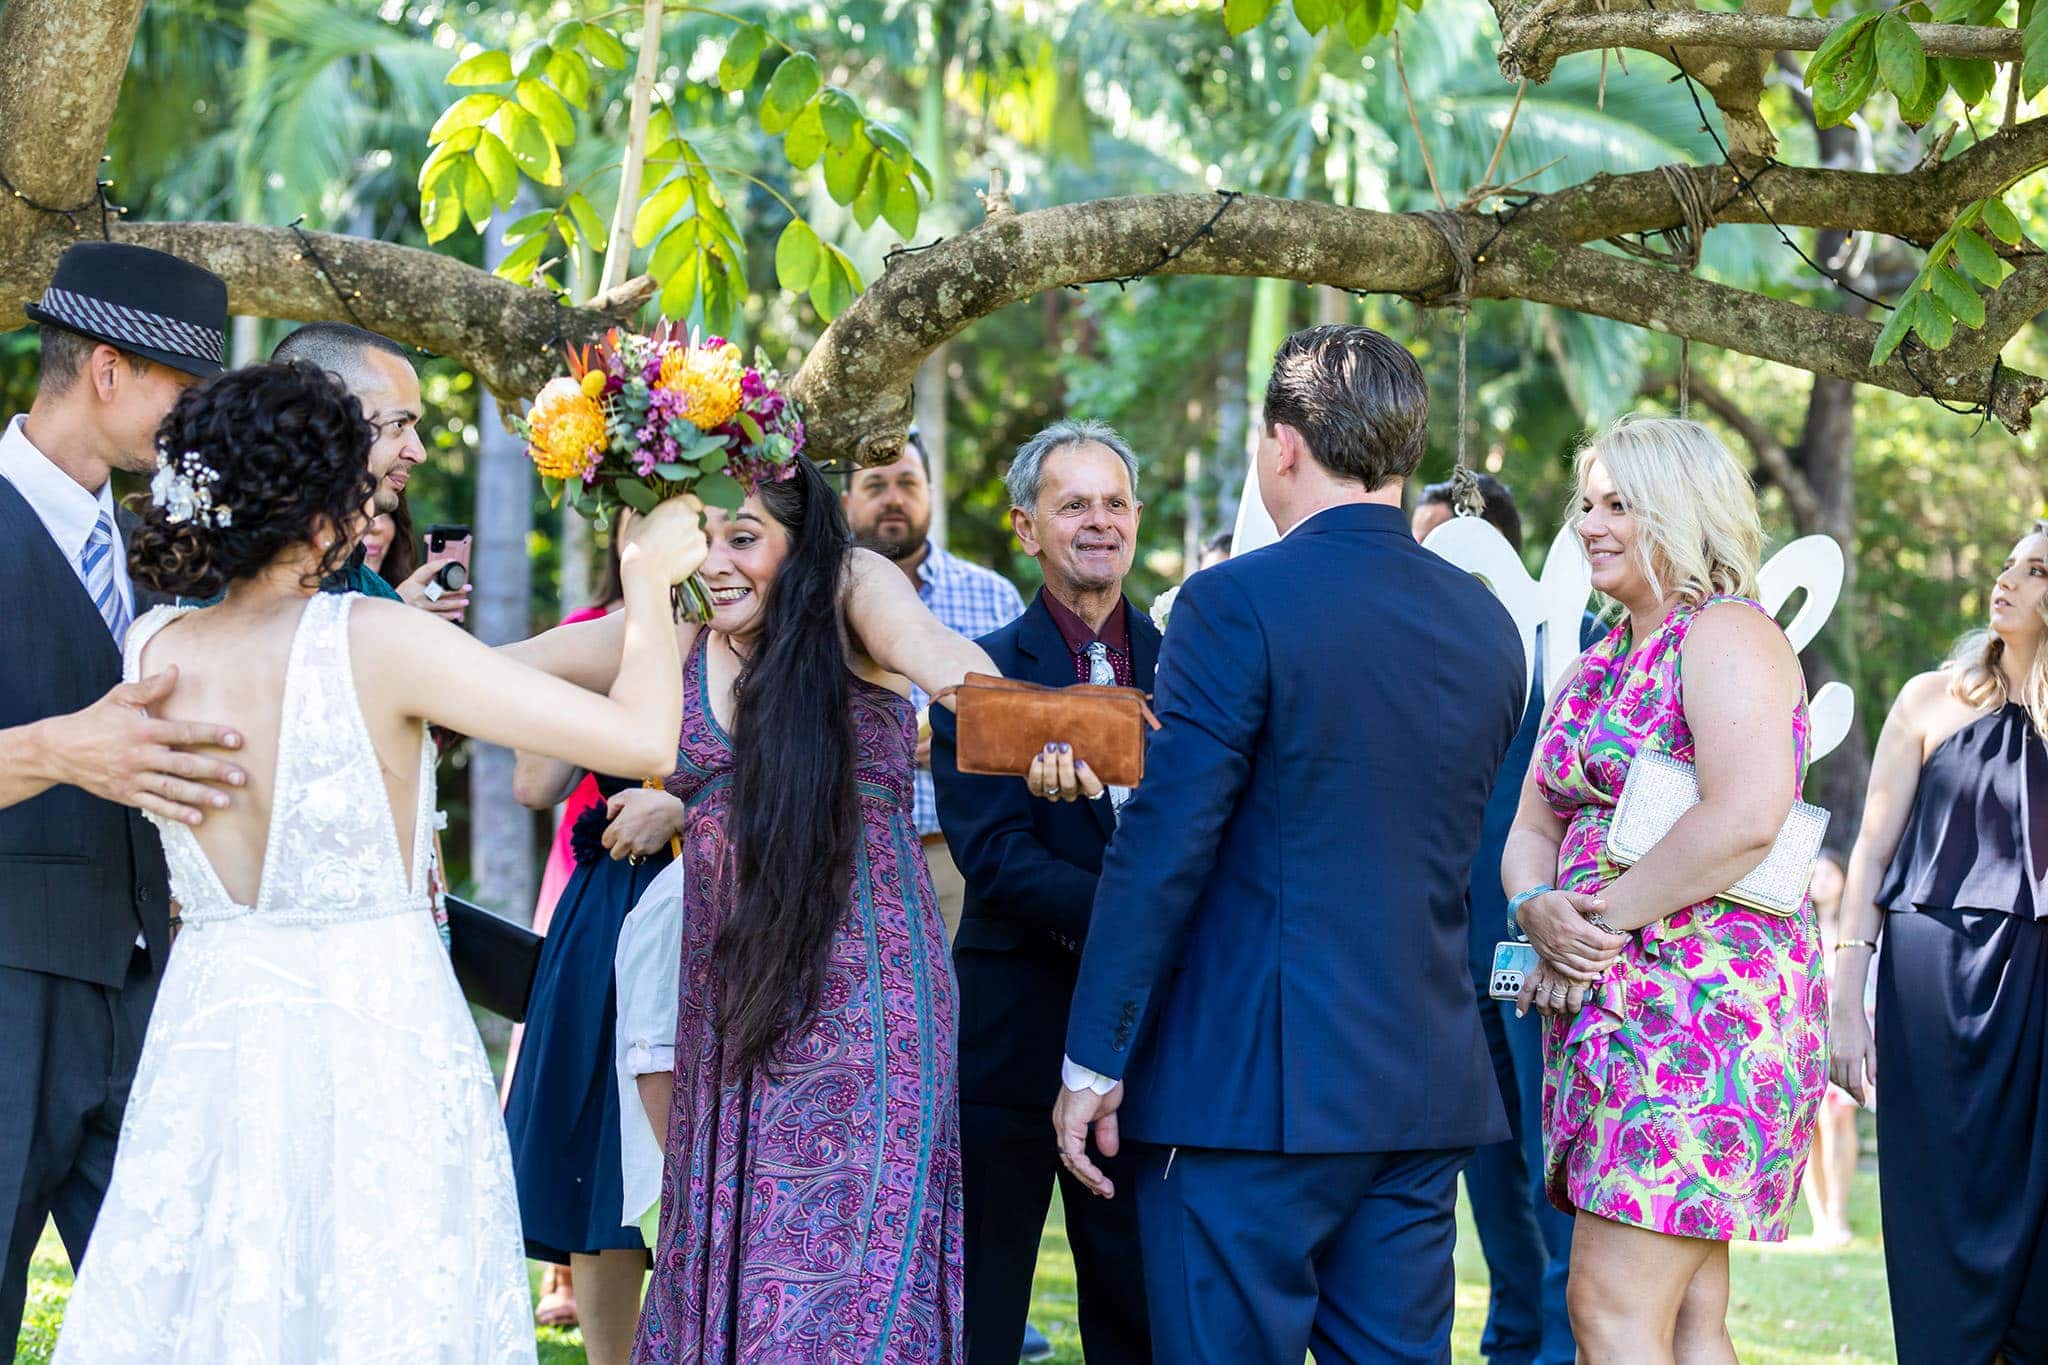 Candid congratulations with wedding guests after the Ceremony at Coolibah Downs under the love tree